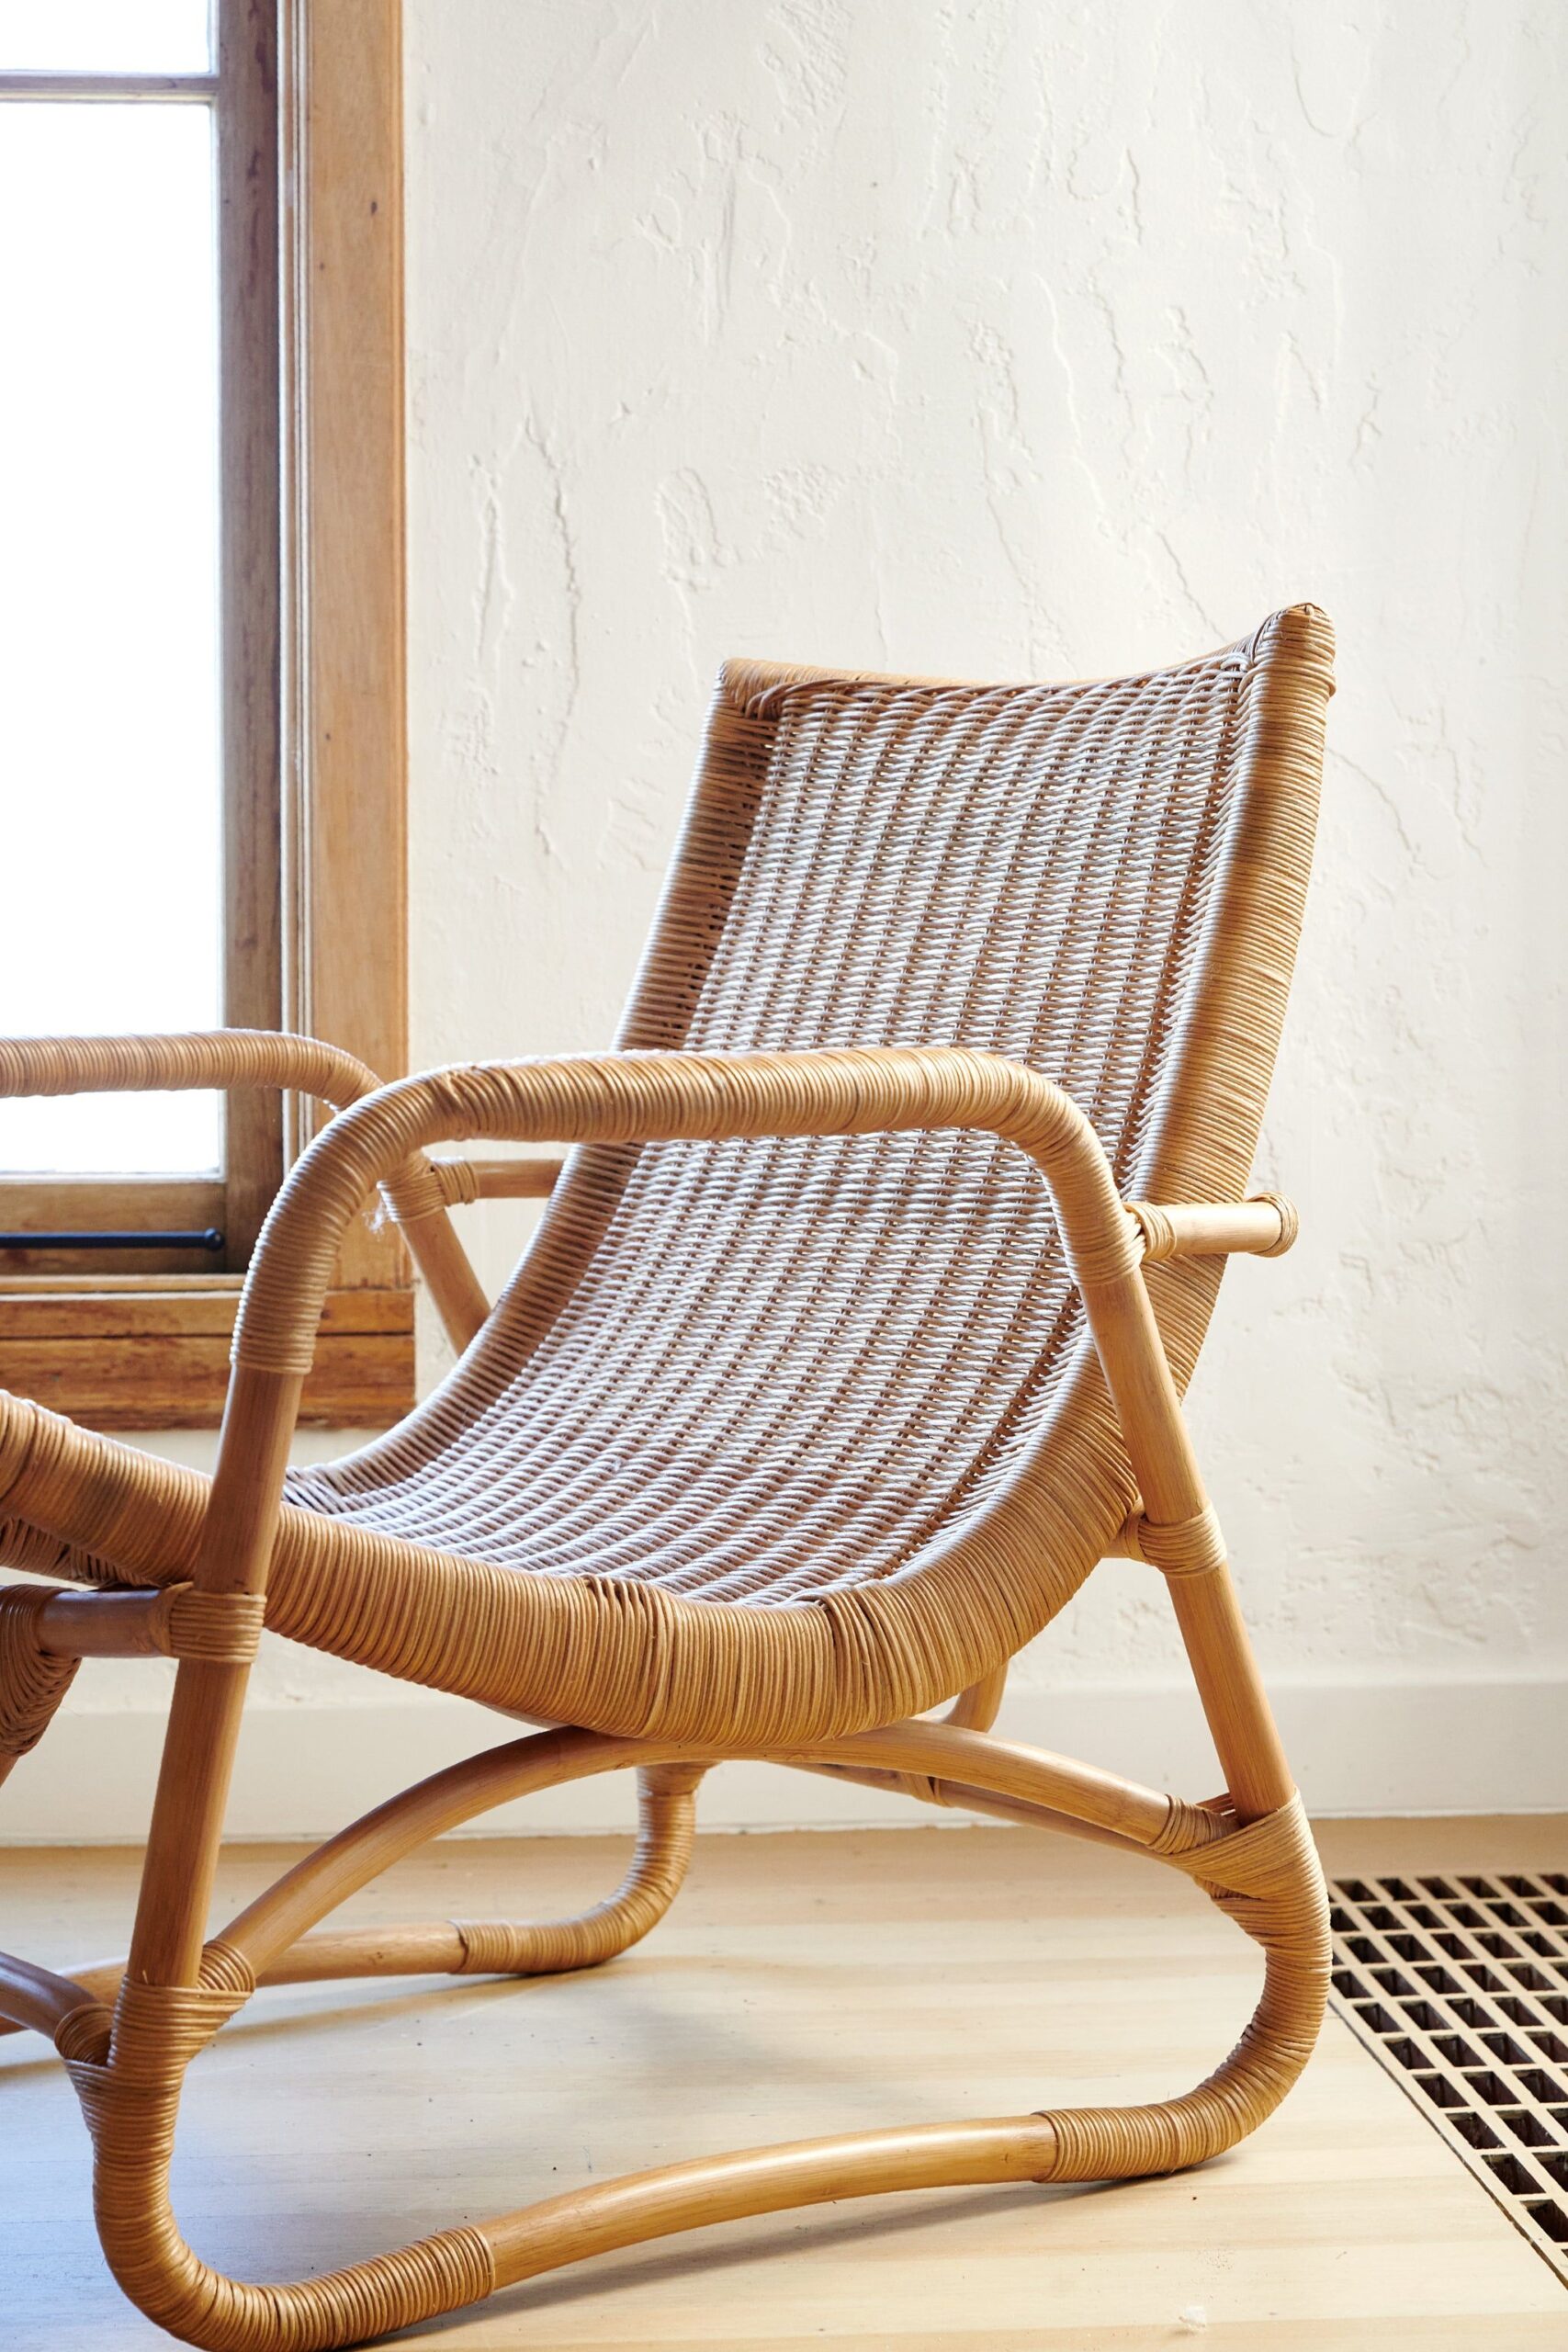 The Beauty of Wicker Rattan Outdoor Furniture